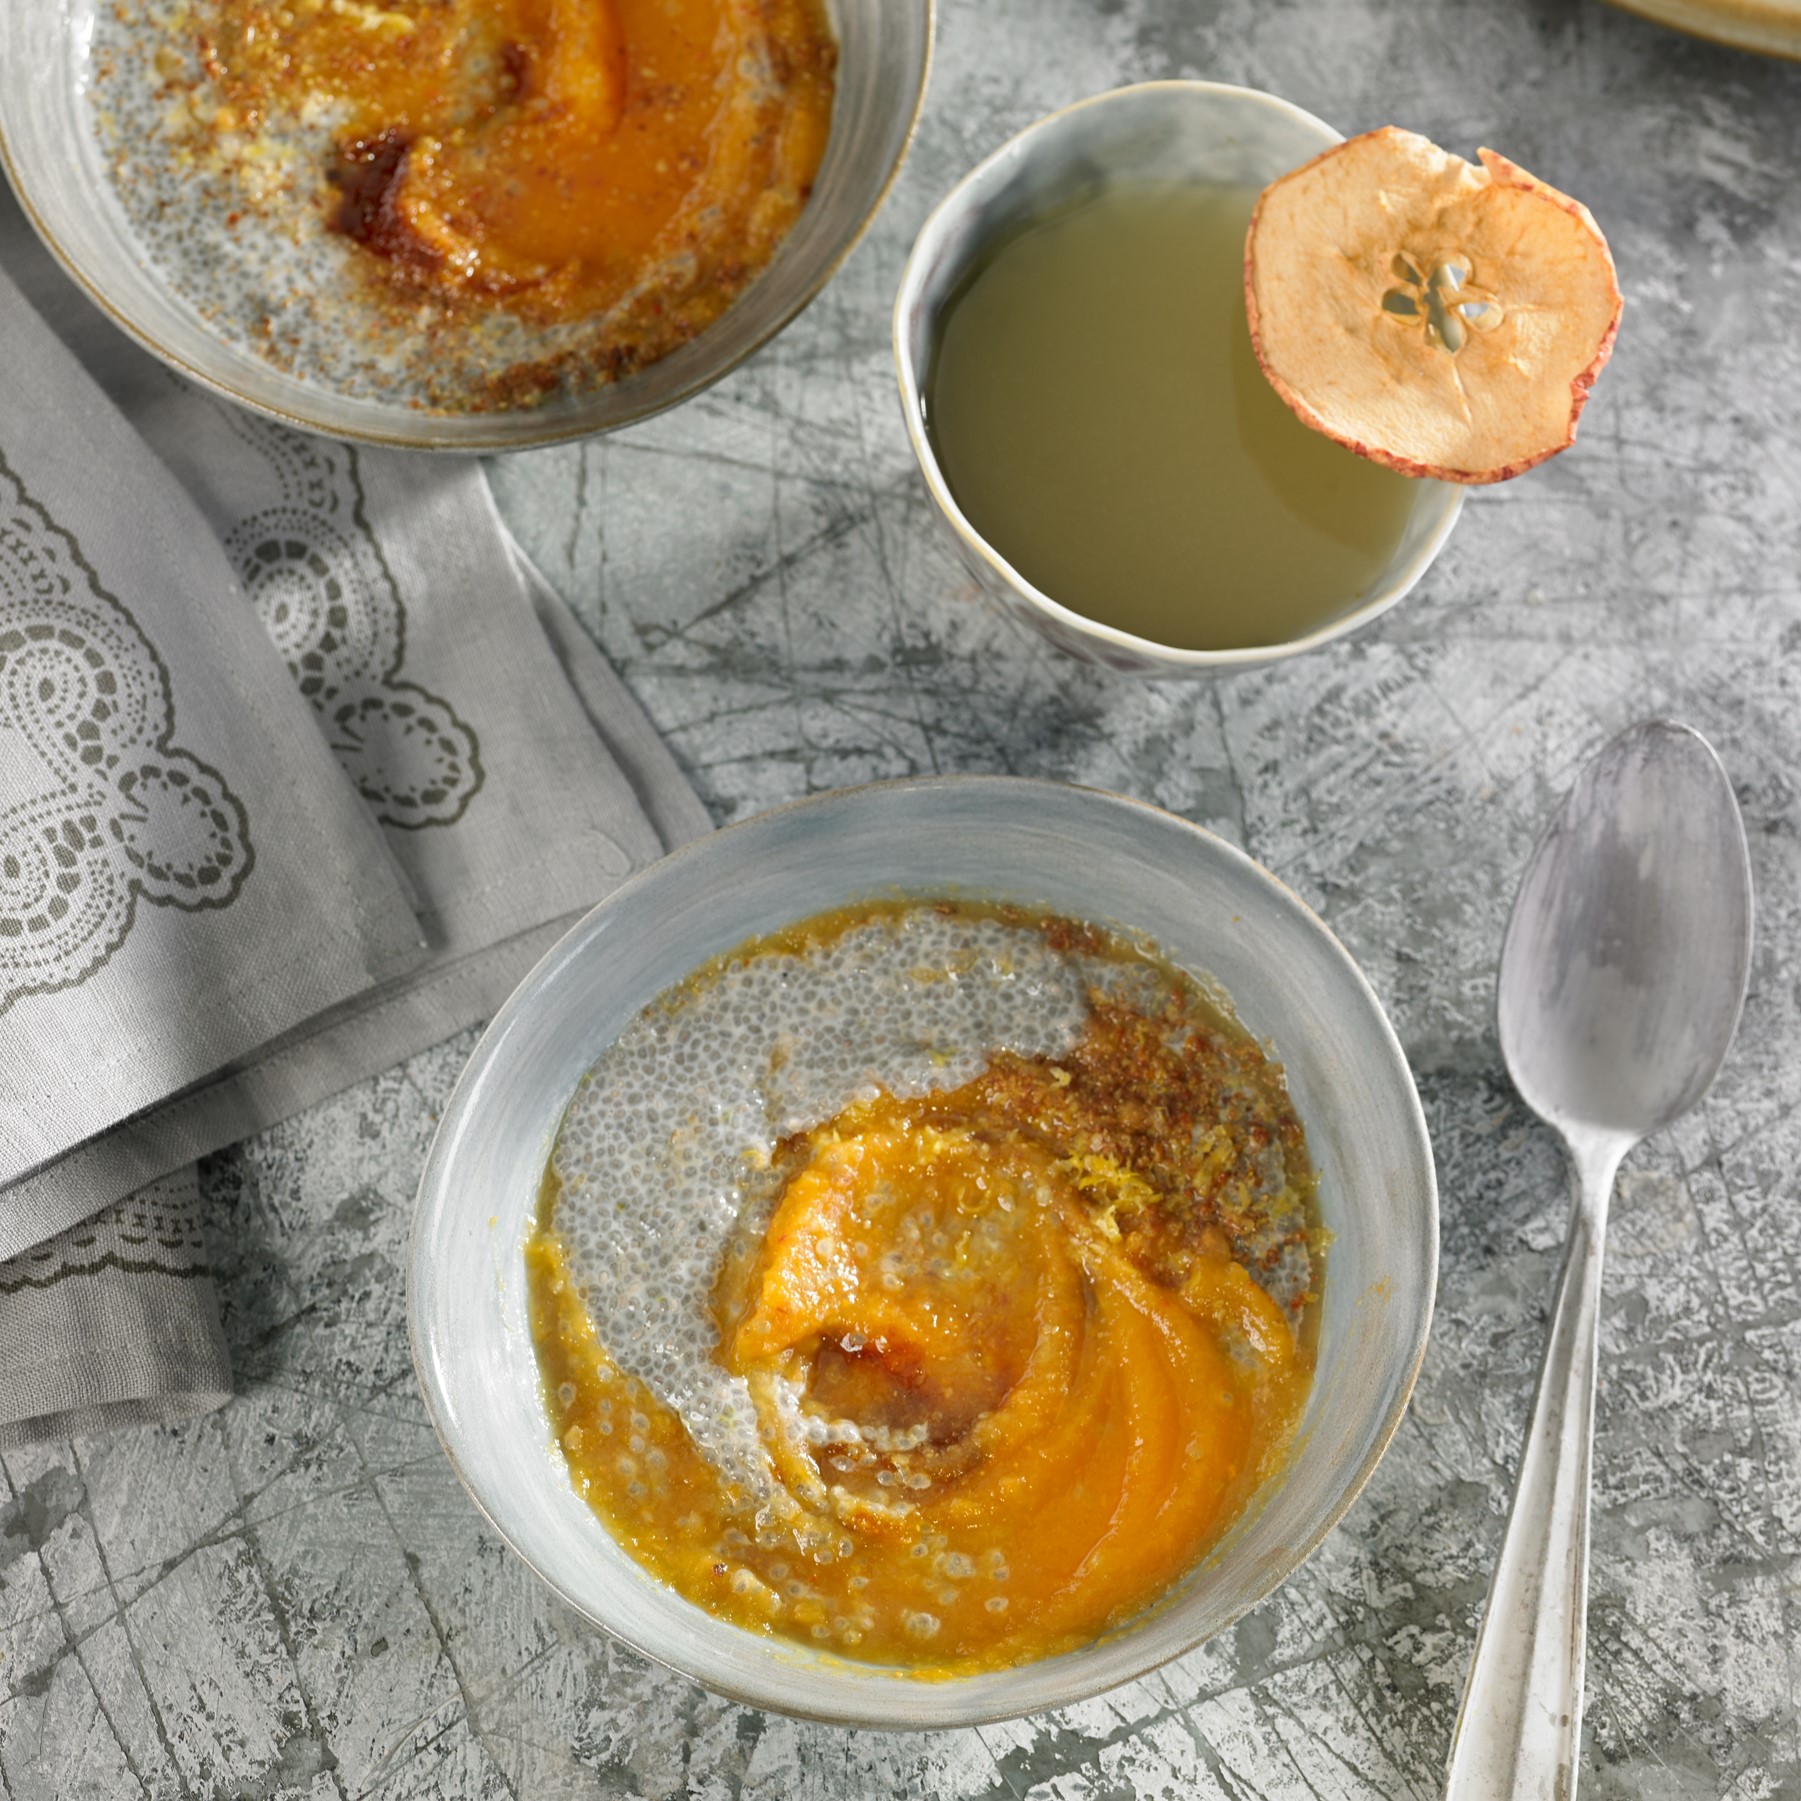 The Homemade Apple Compote With Chia And Carrots Puree